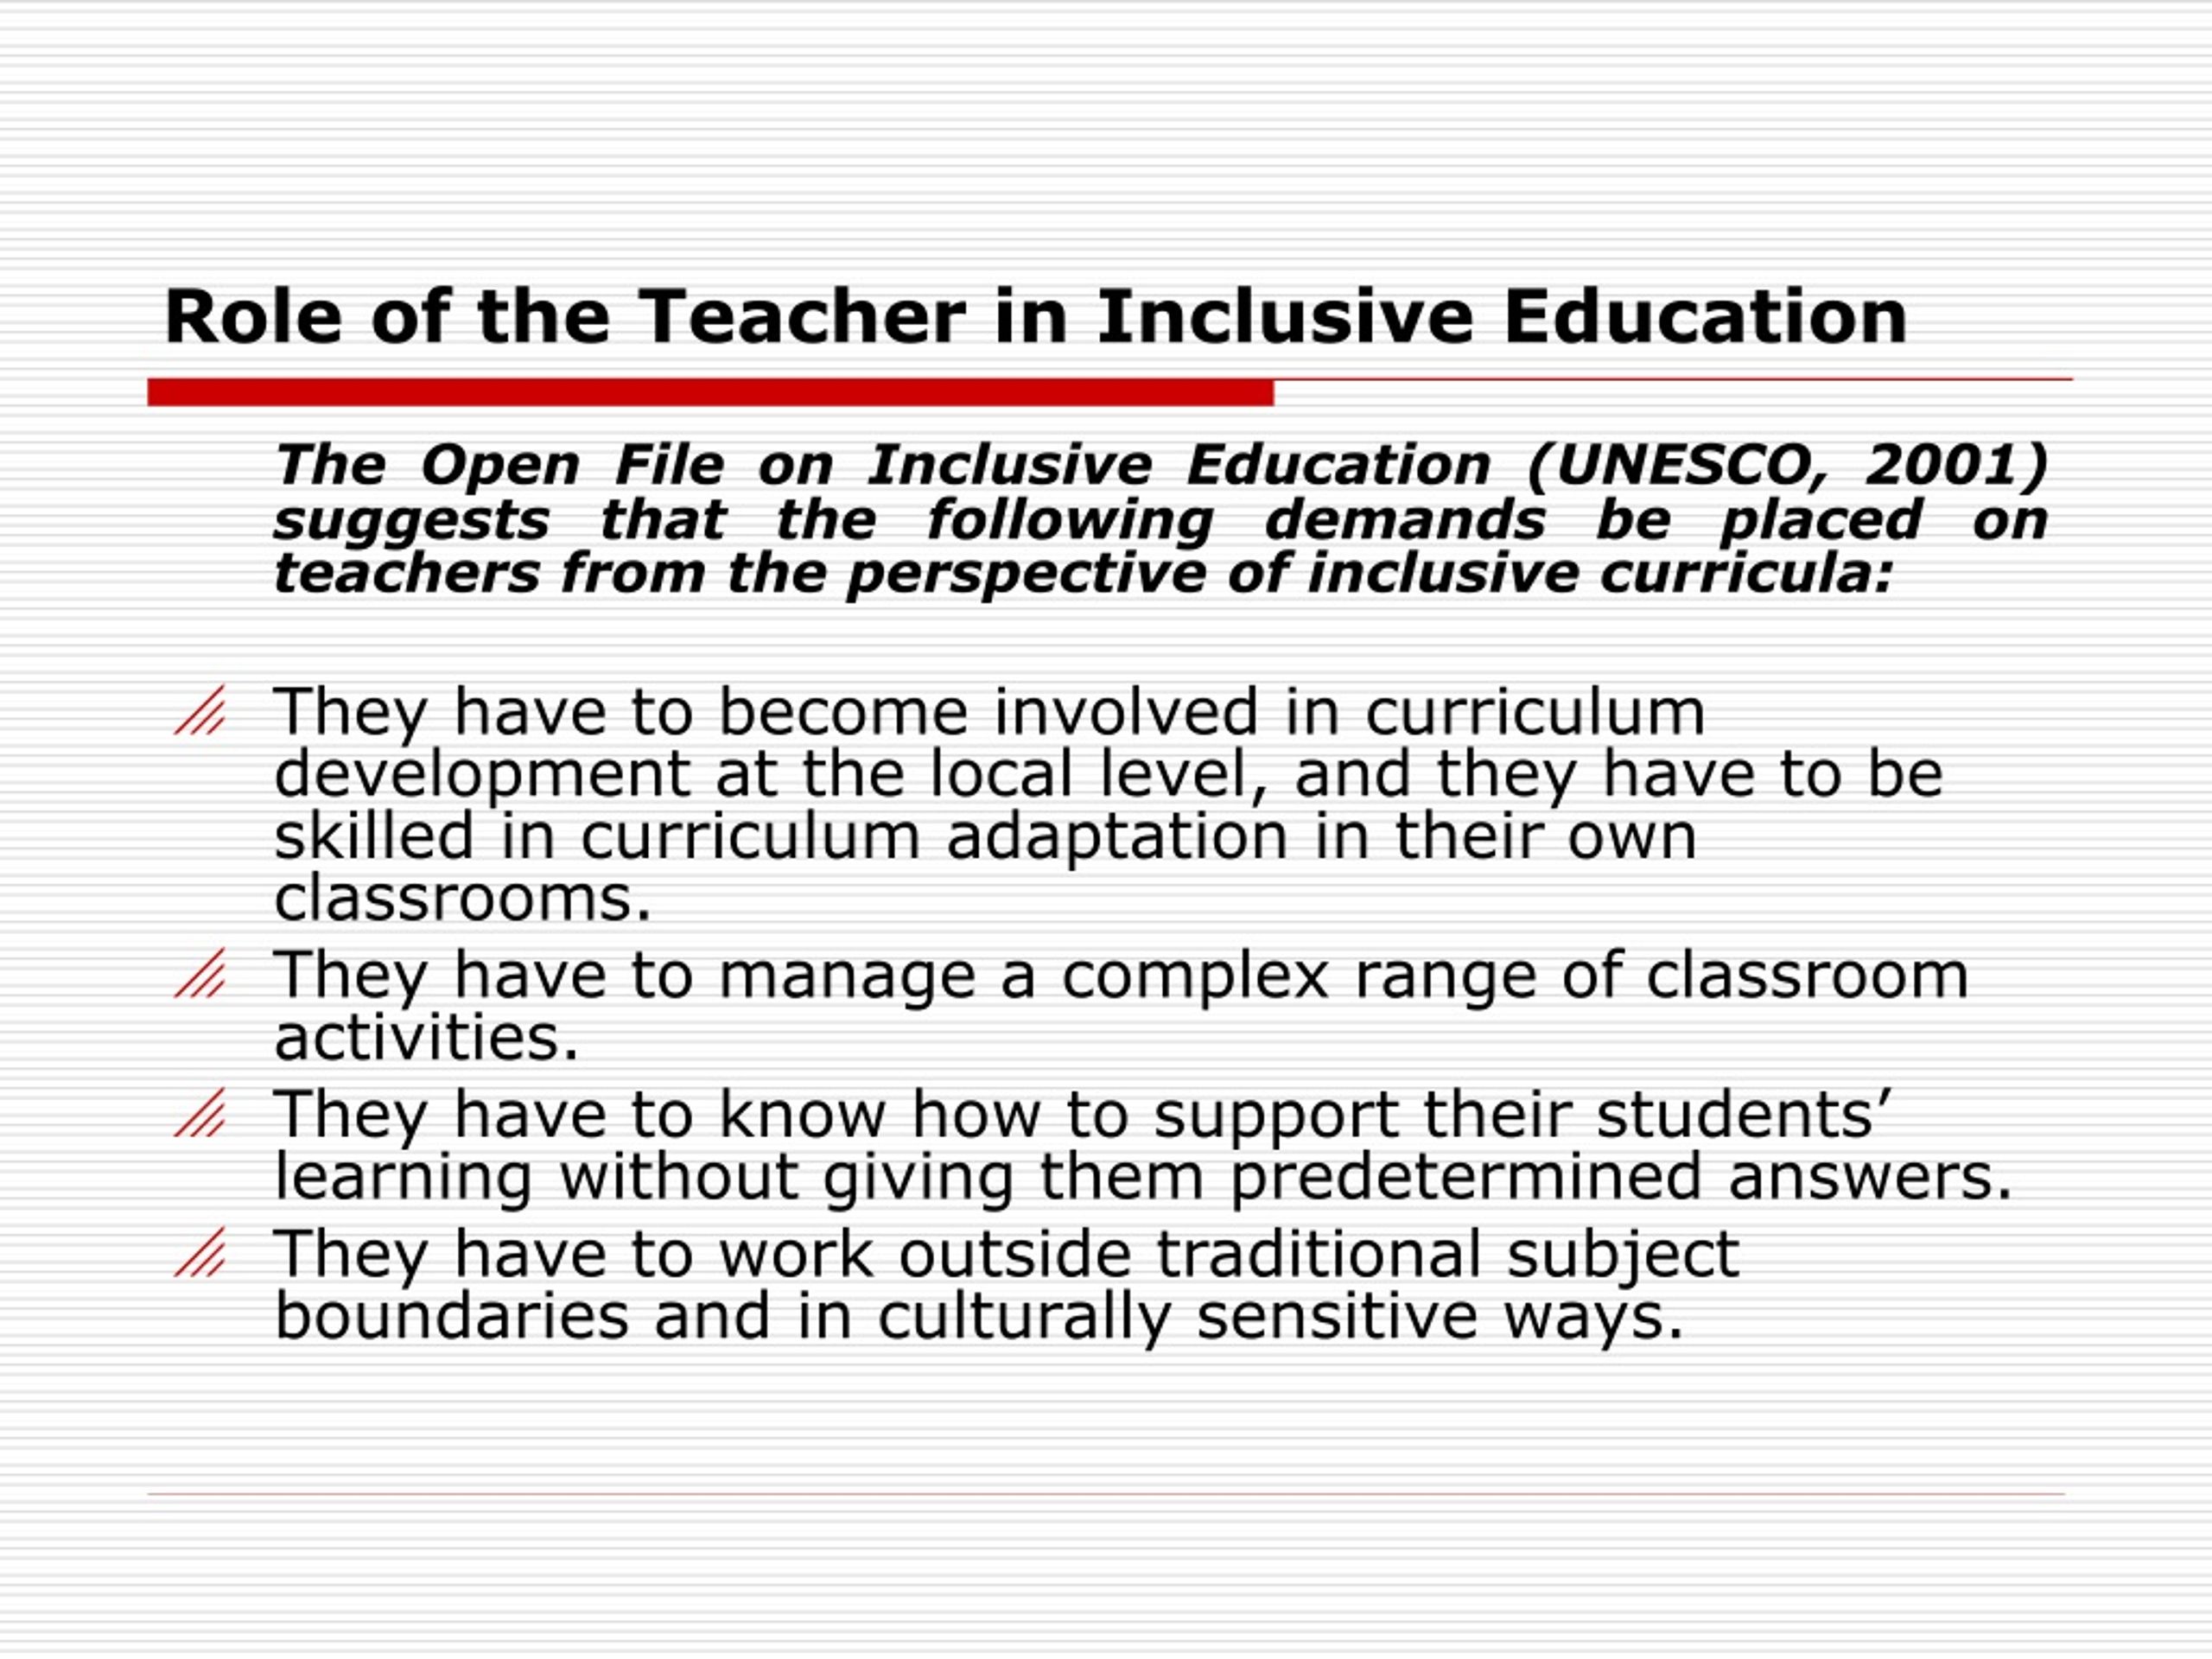 research study about inclusive education